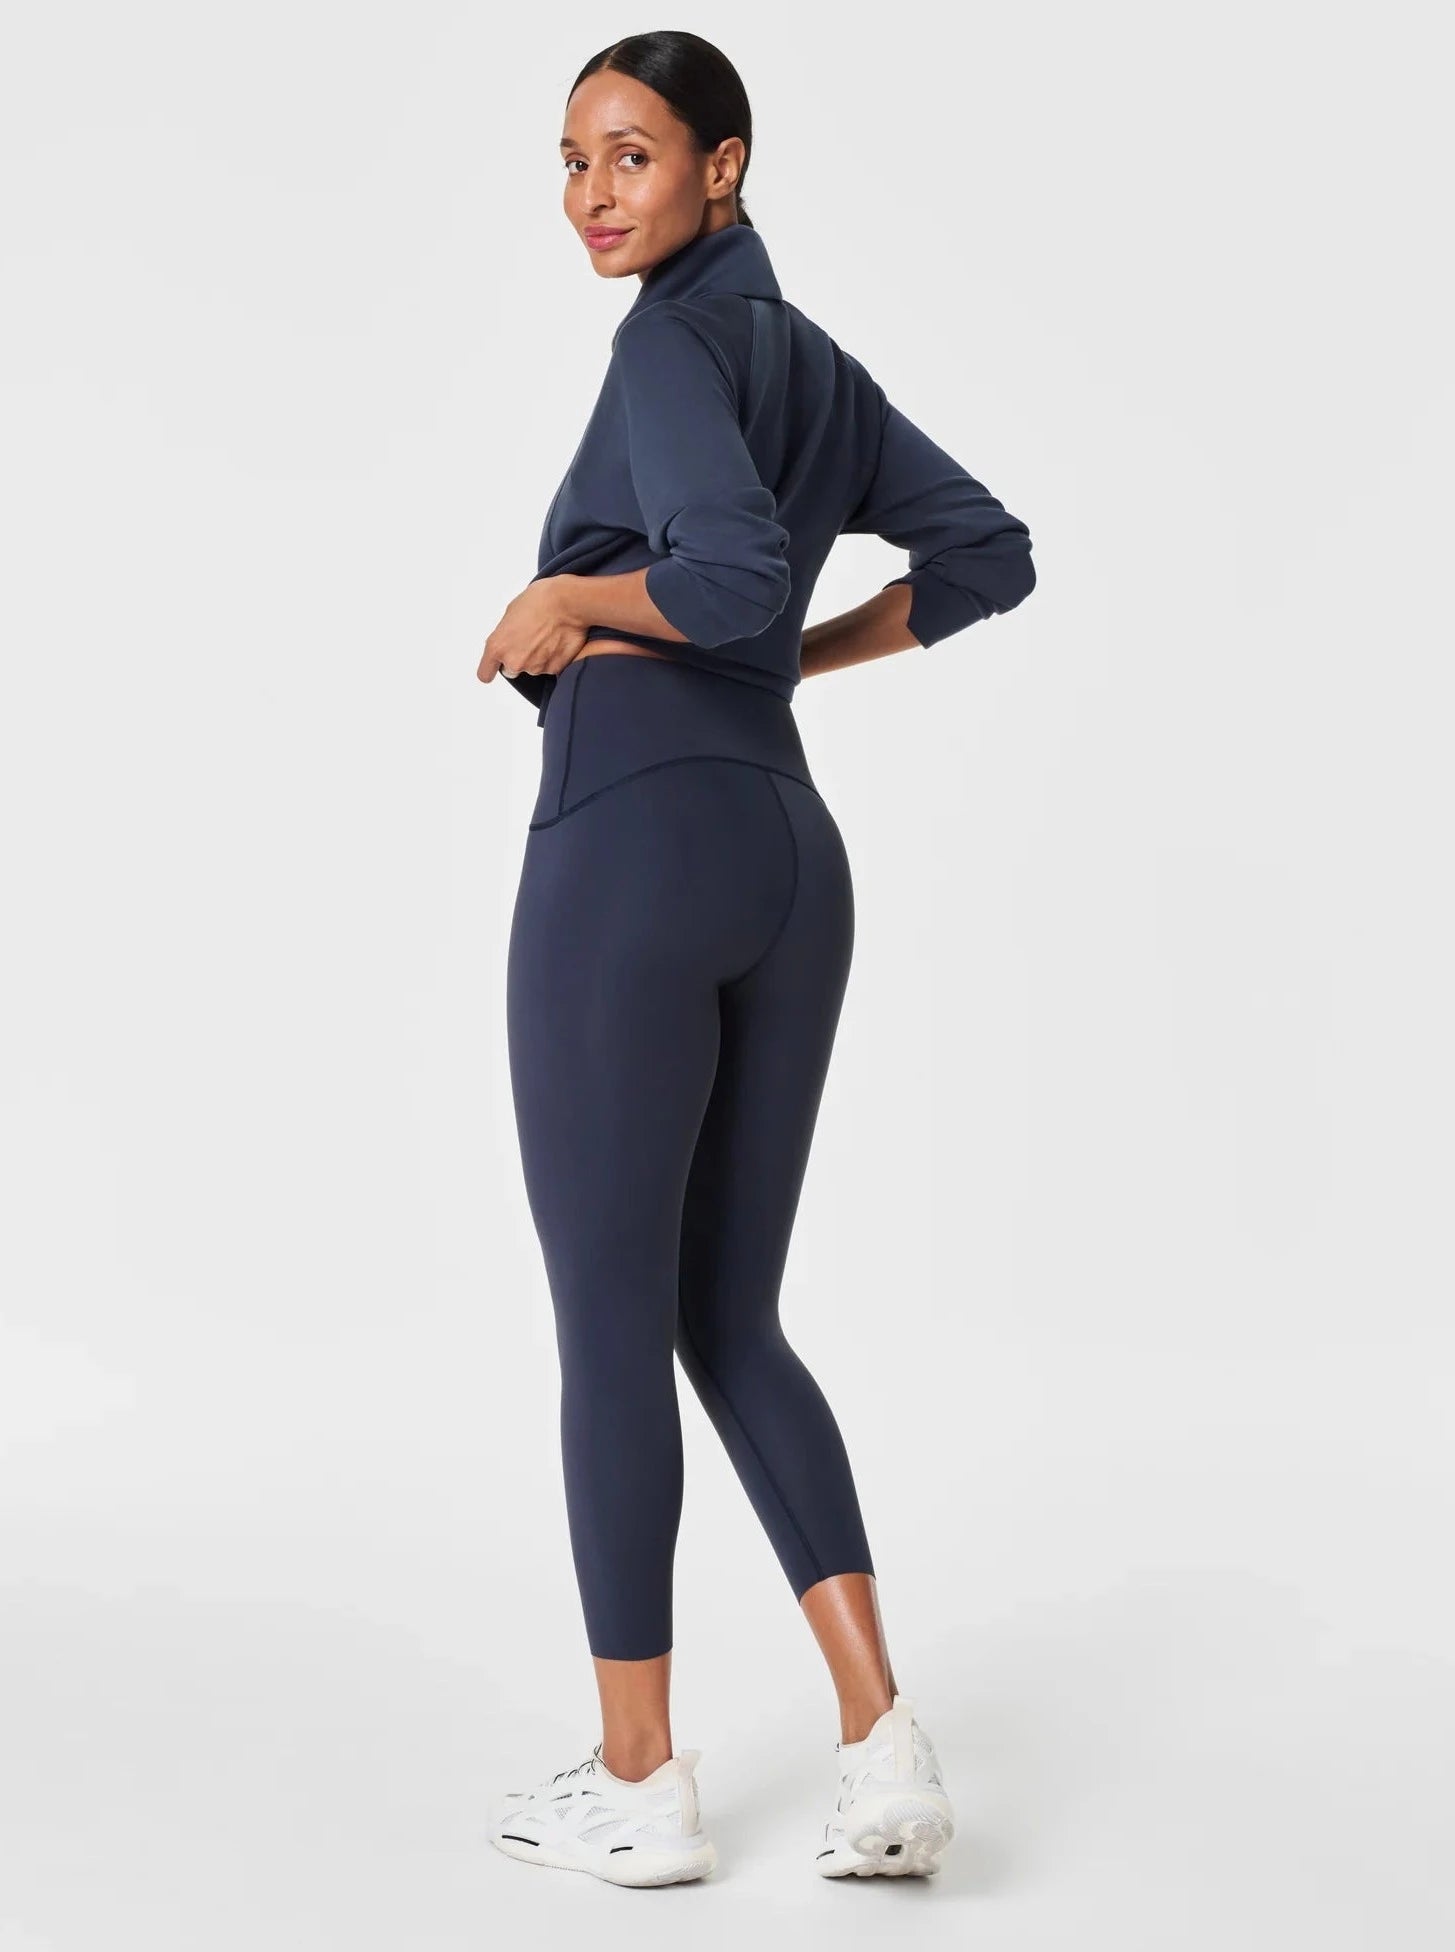 Review: Spanx Booty Boost Active 7/8 Leggings